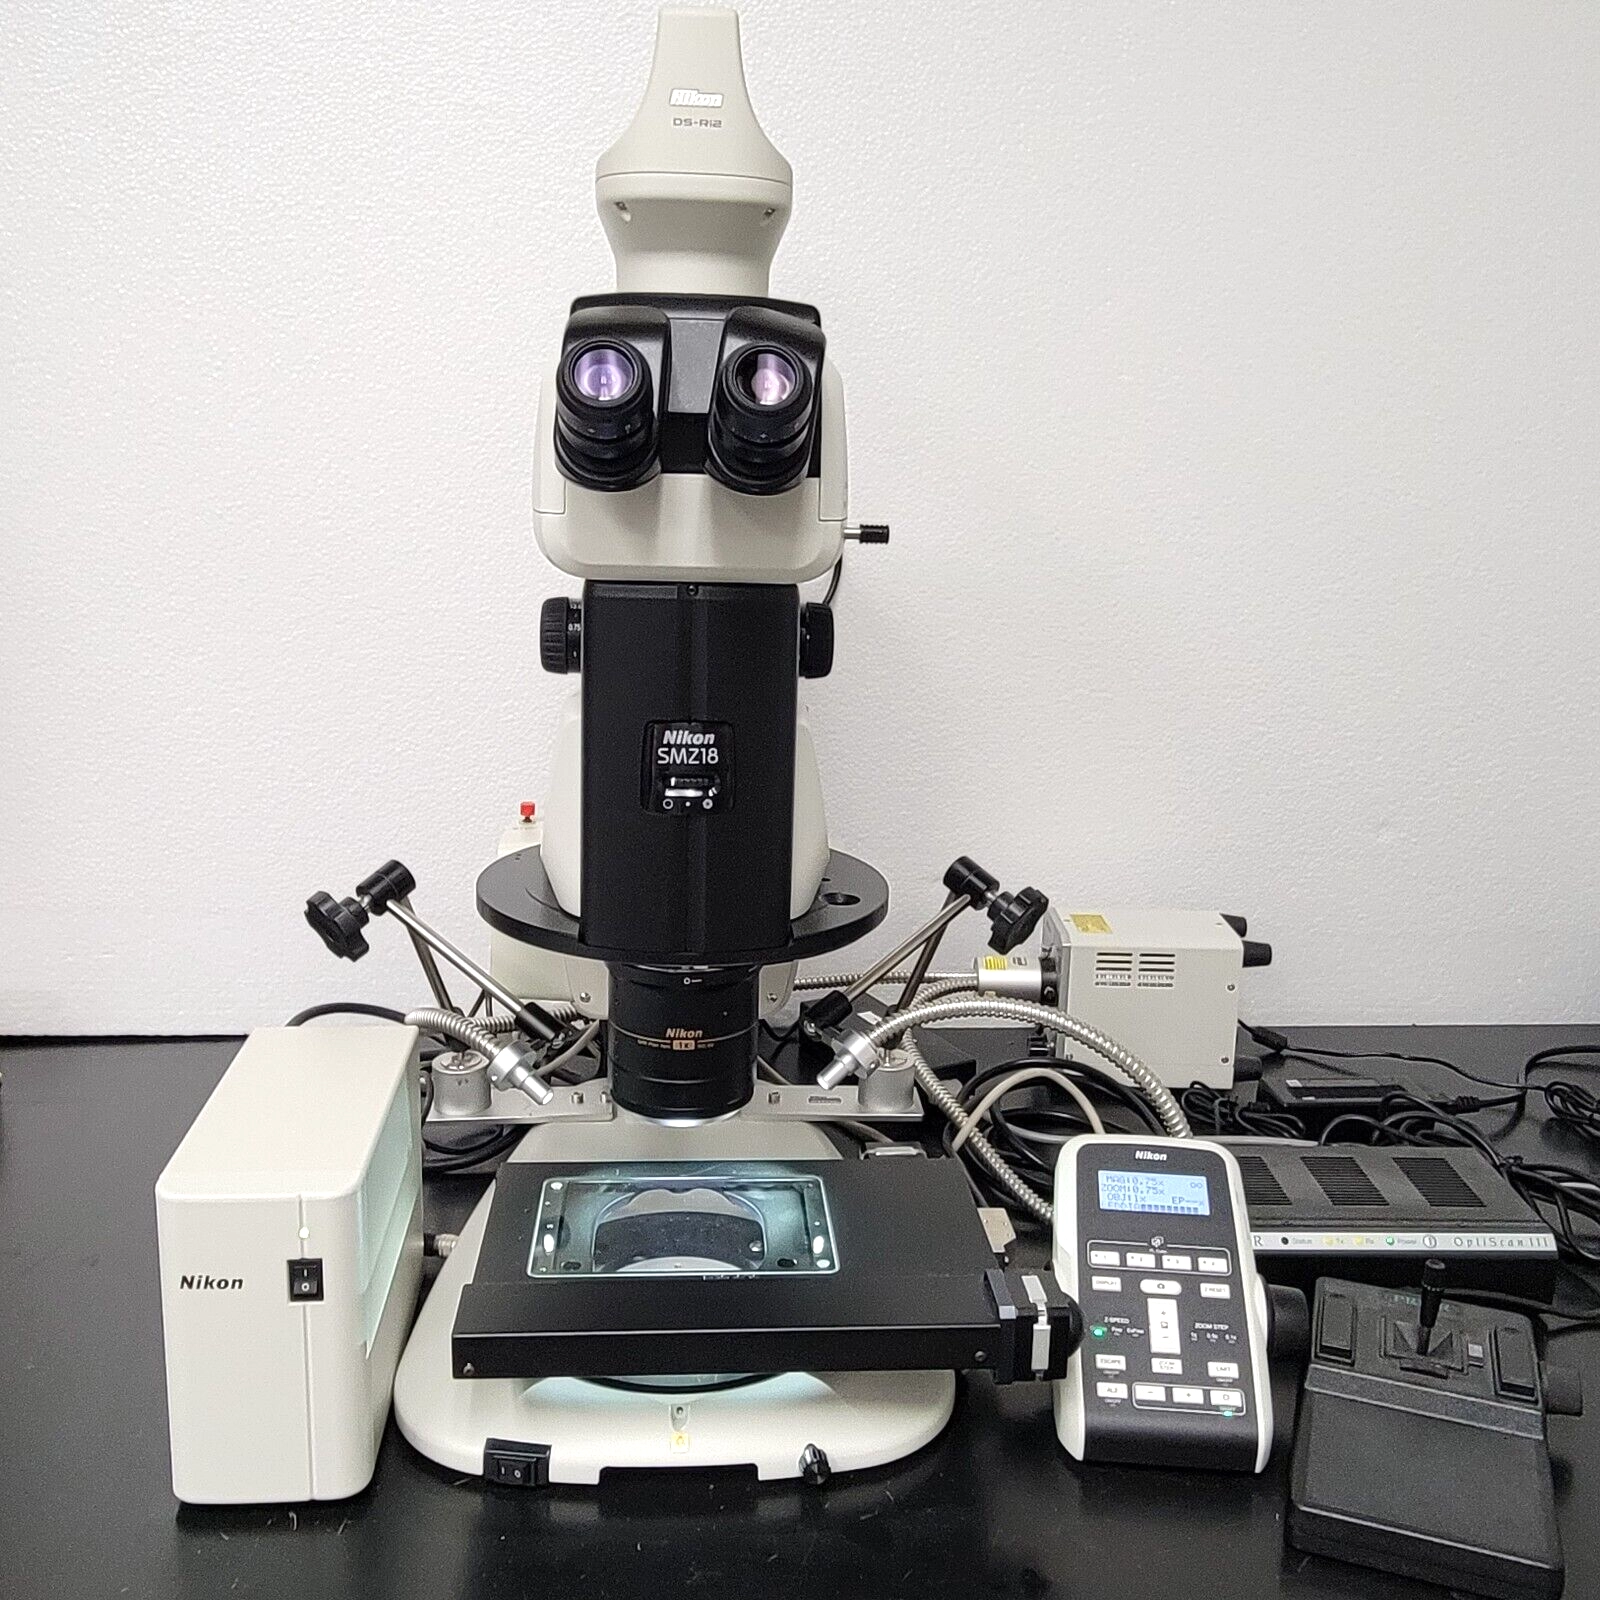 Nikon Stereo Microscope Motorized SMZ18 with Transmitted and Reflected Light